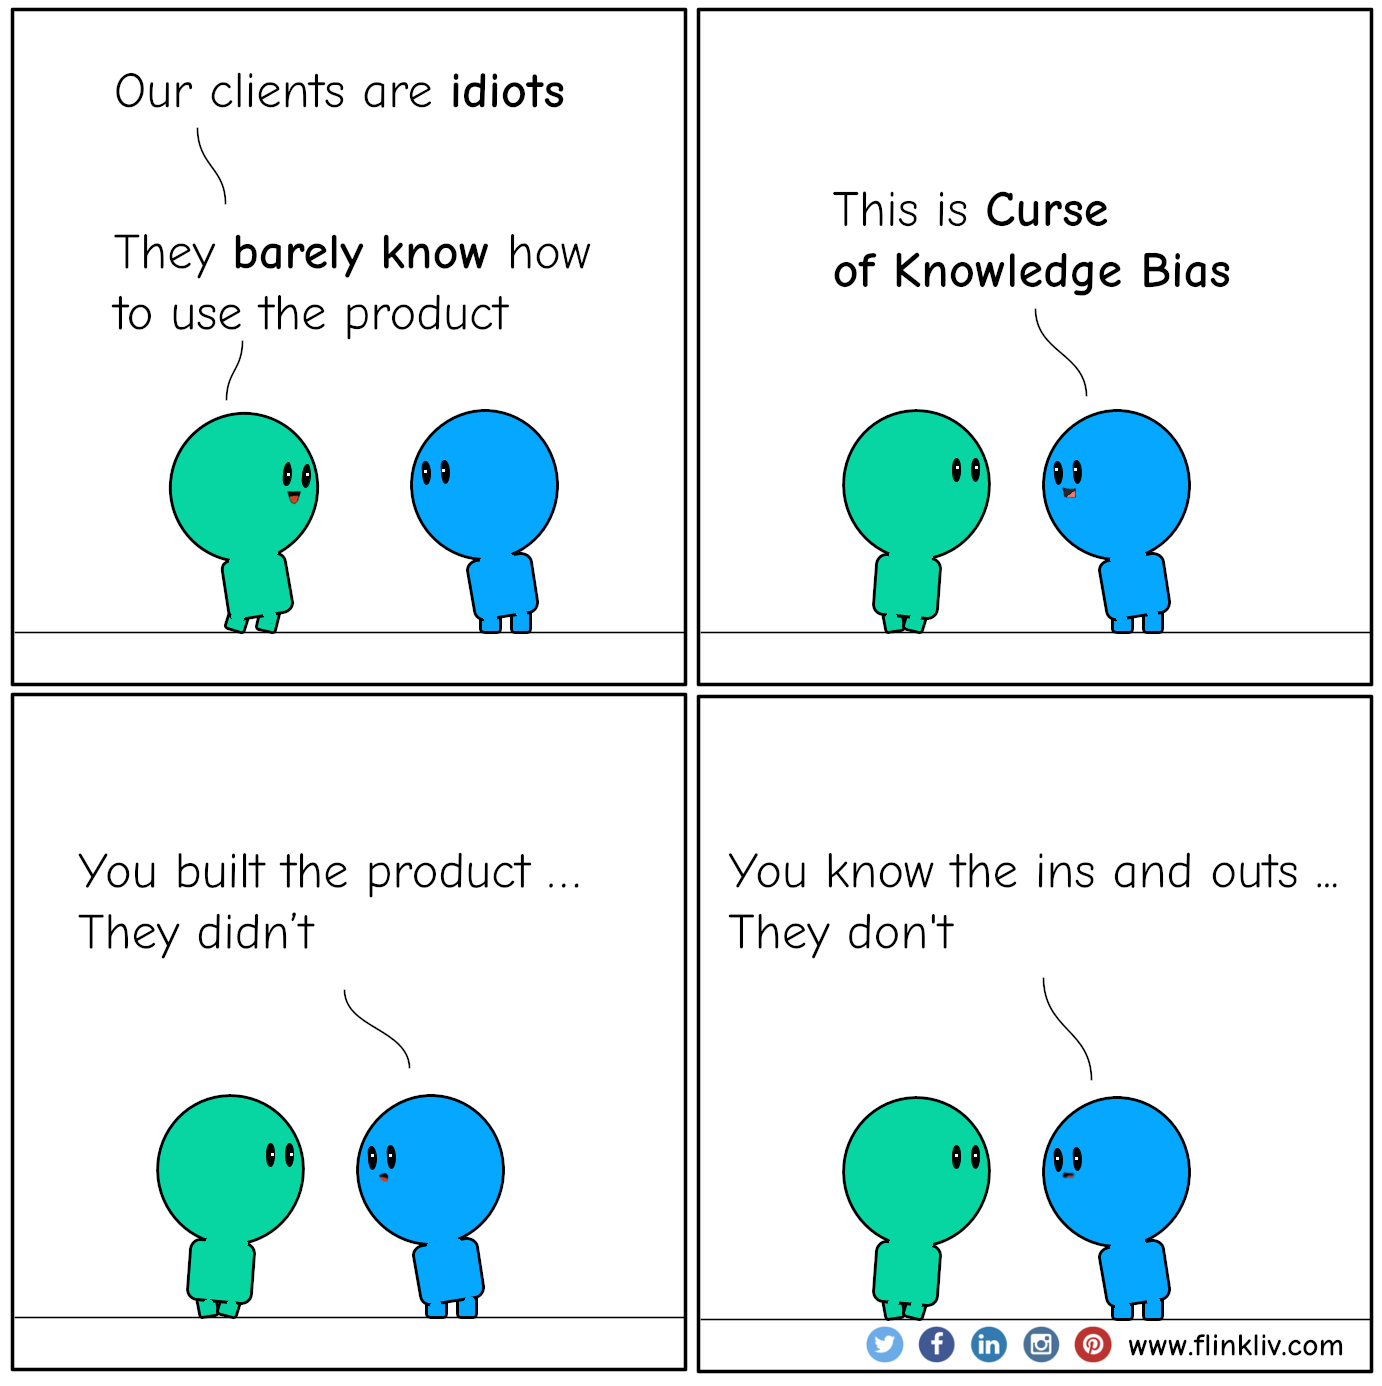 Conversation between A and B about the curse of knowledge bias. A: Our clients are idiots A: They barely know how to use the product B: This is Curse of Knowledge Bias B: You built the product, they did not B: You know the ins and outs, they don’t.
				By Flinkliv.com